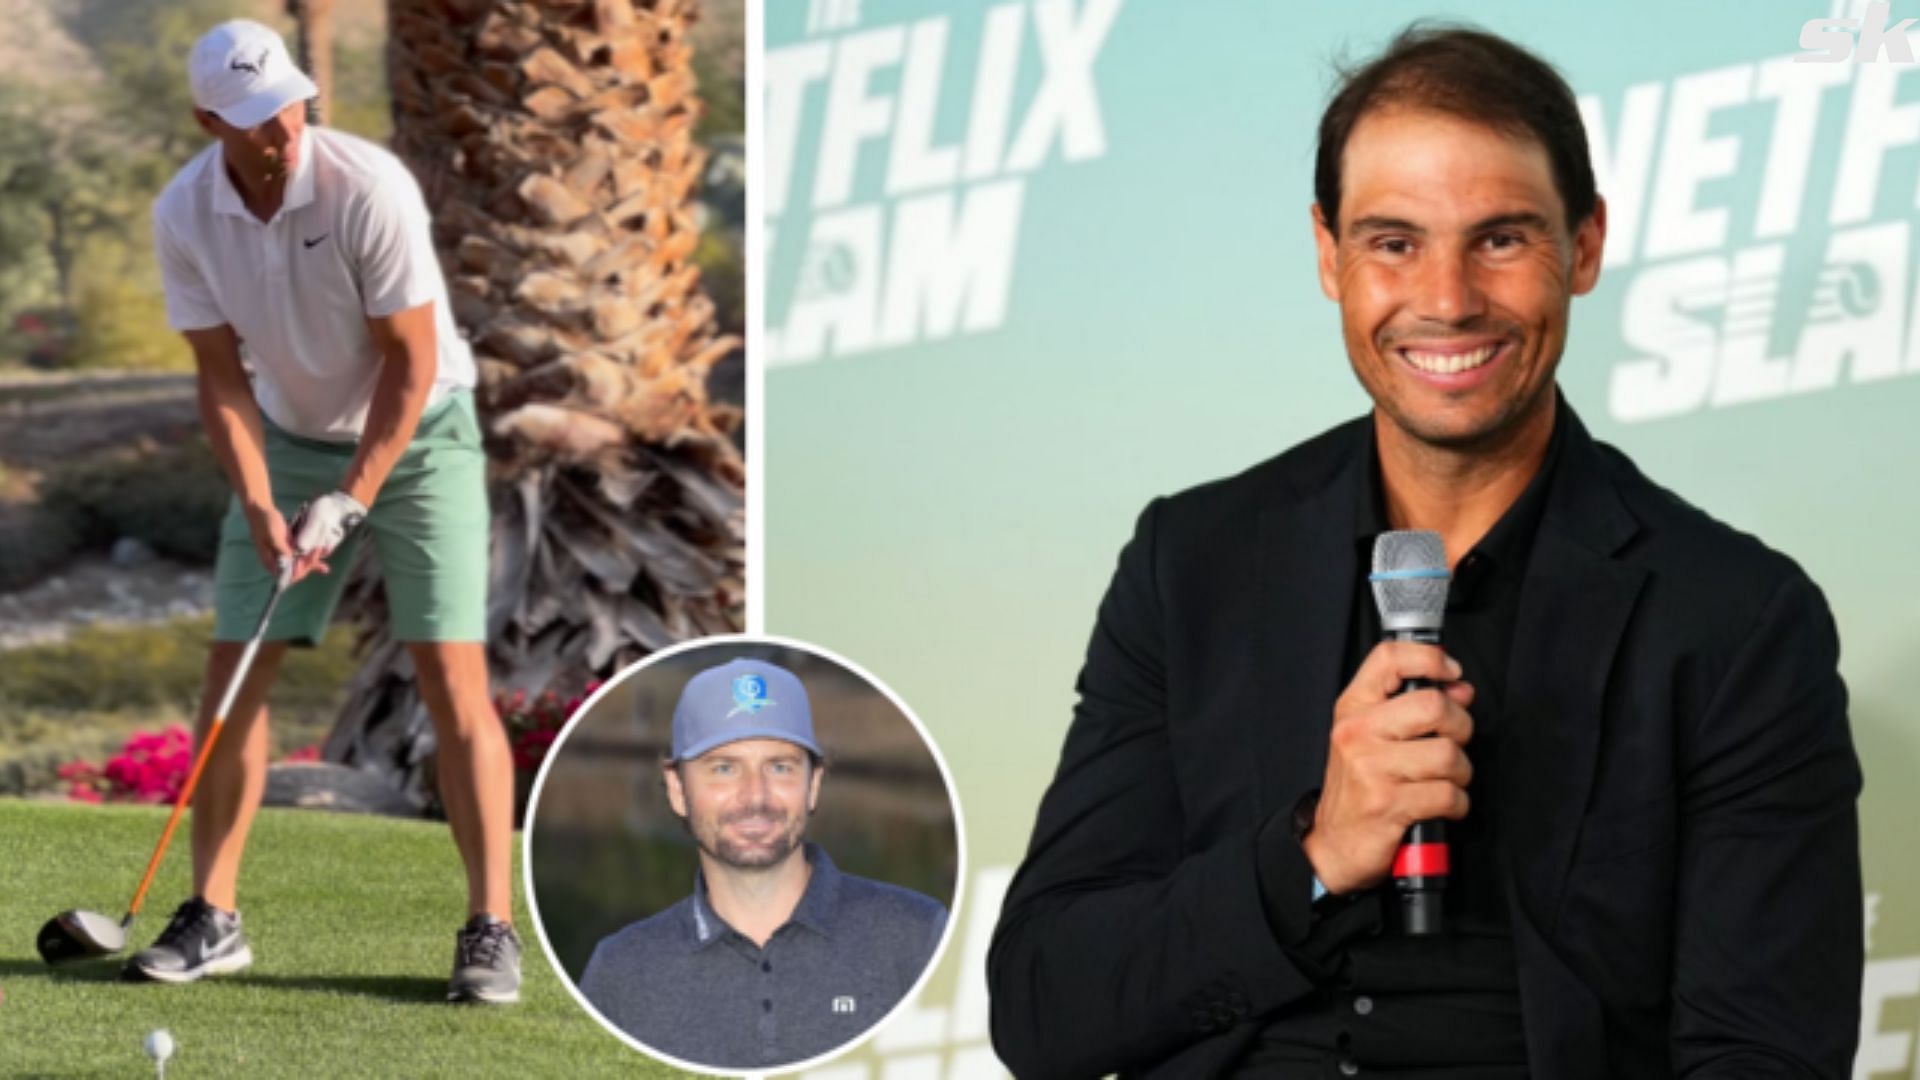 Former tennis pro Mardy Fish reacts to Rafael Nadal on the golf course